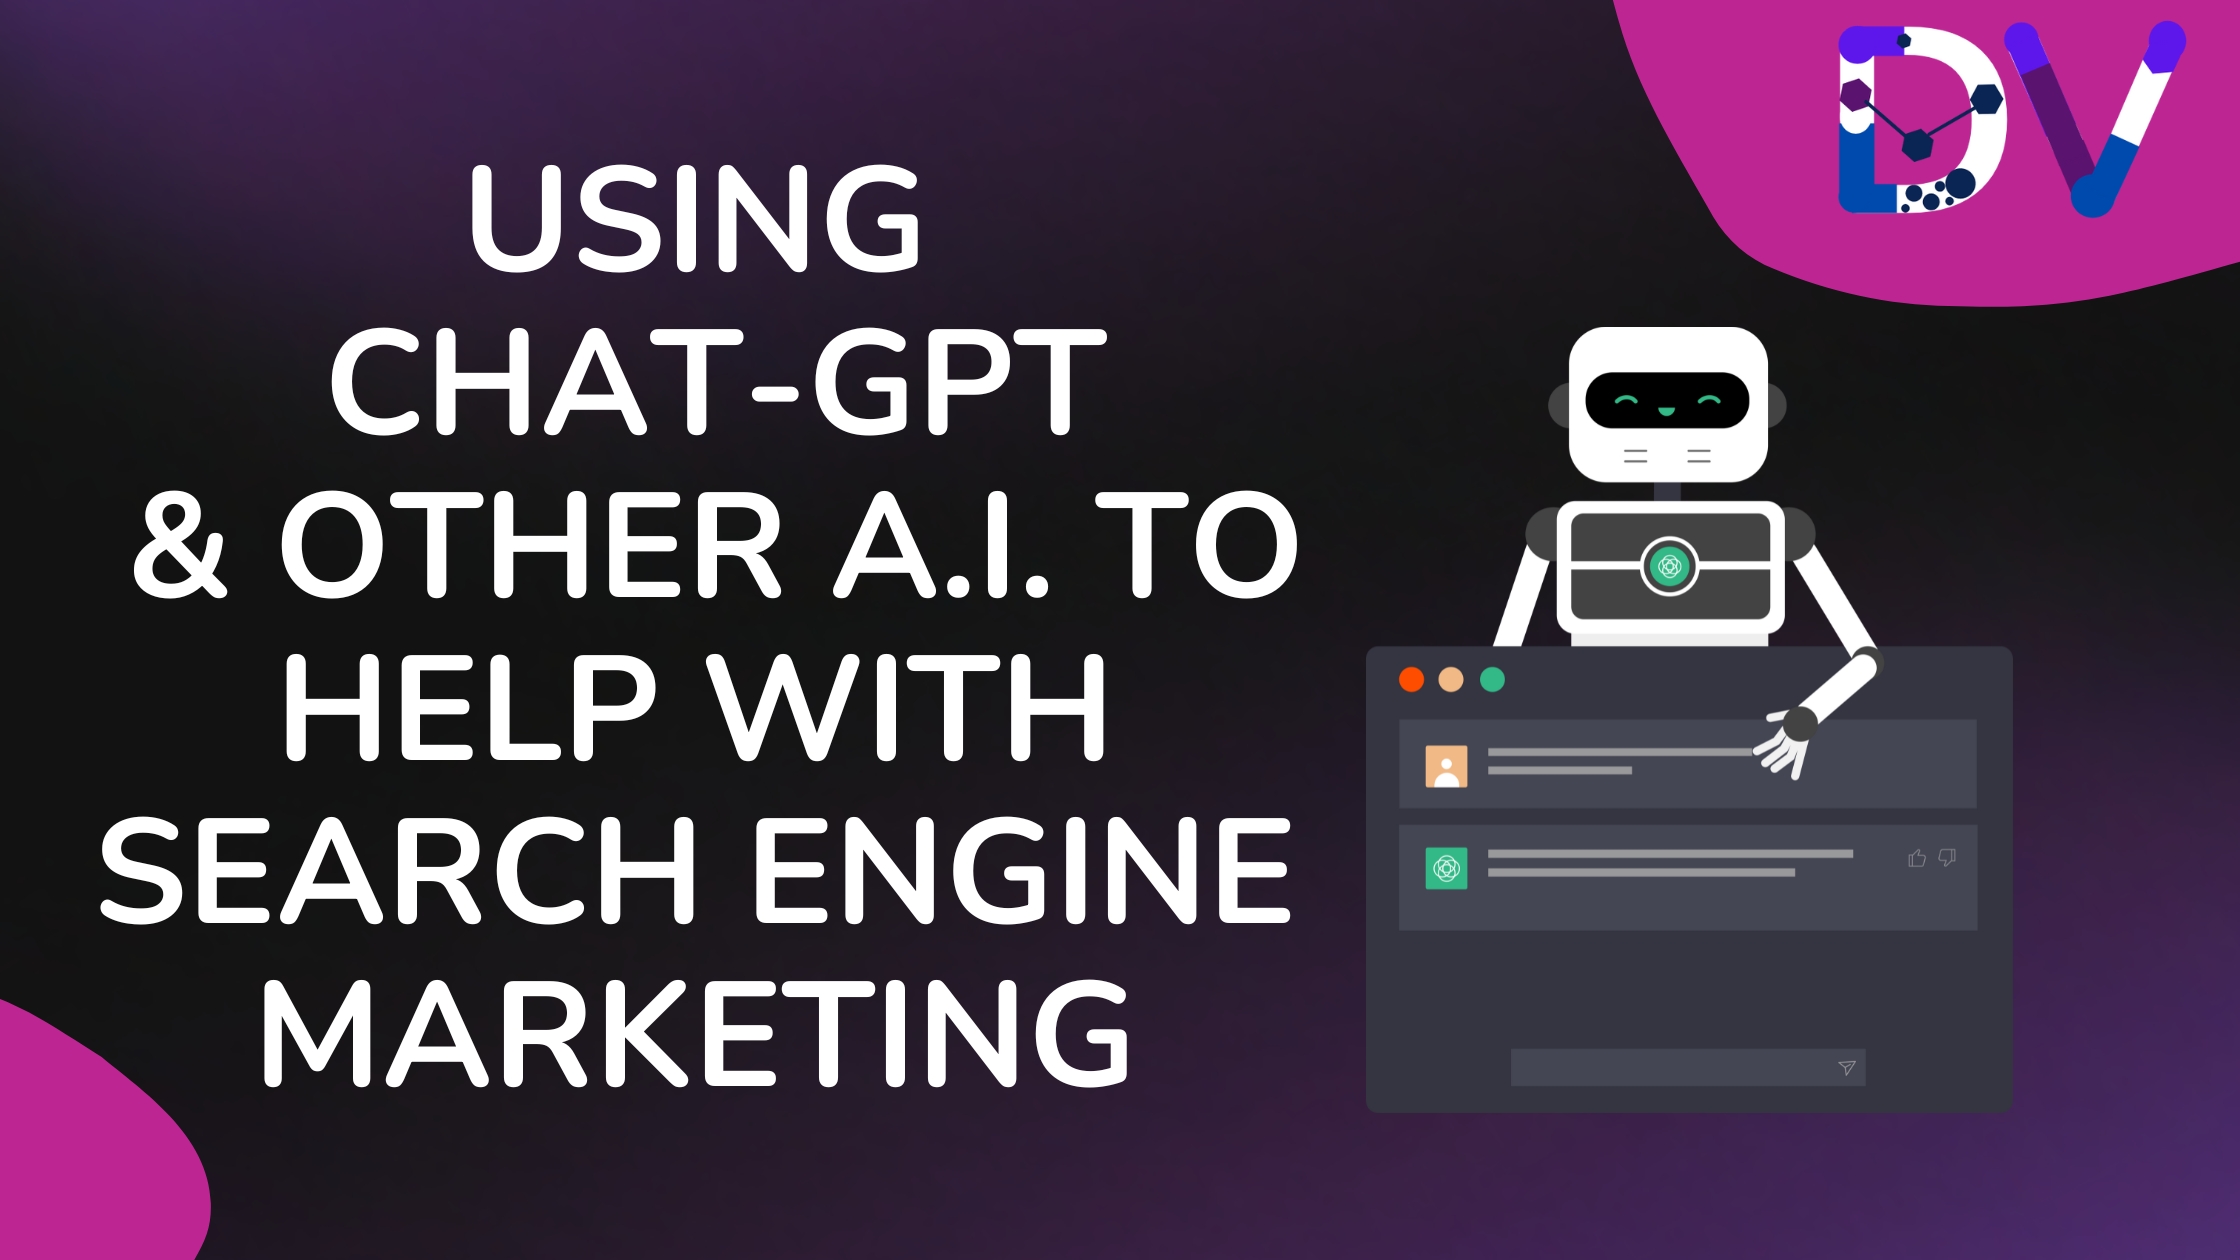 Using ChatGPT & Other A.I. to Help with Search Engine Marketing